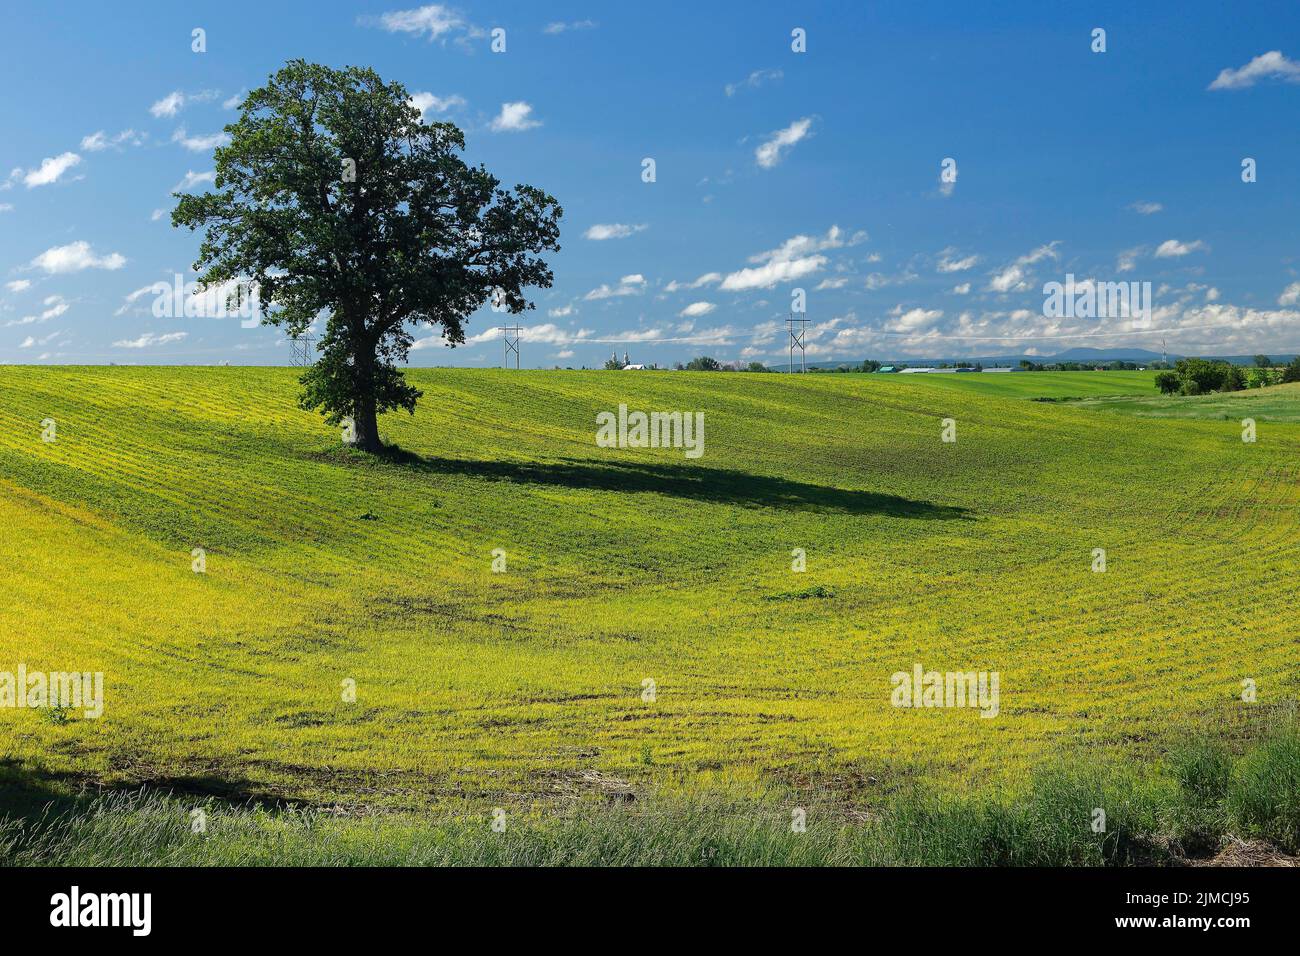 Agriculture, farmland, Province of Quebec, Canada Stock Photo